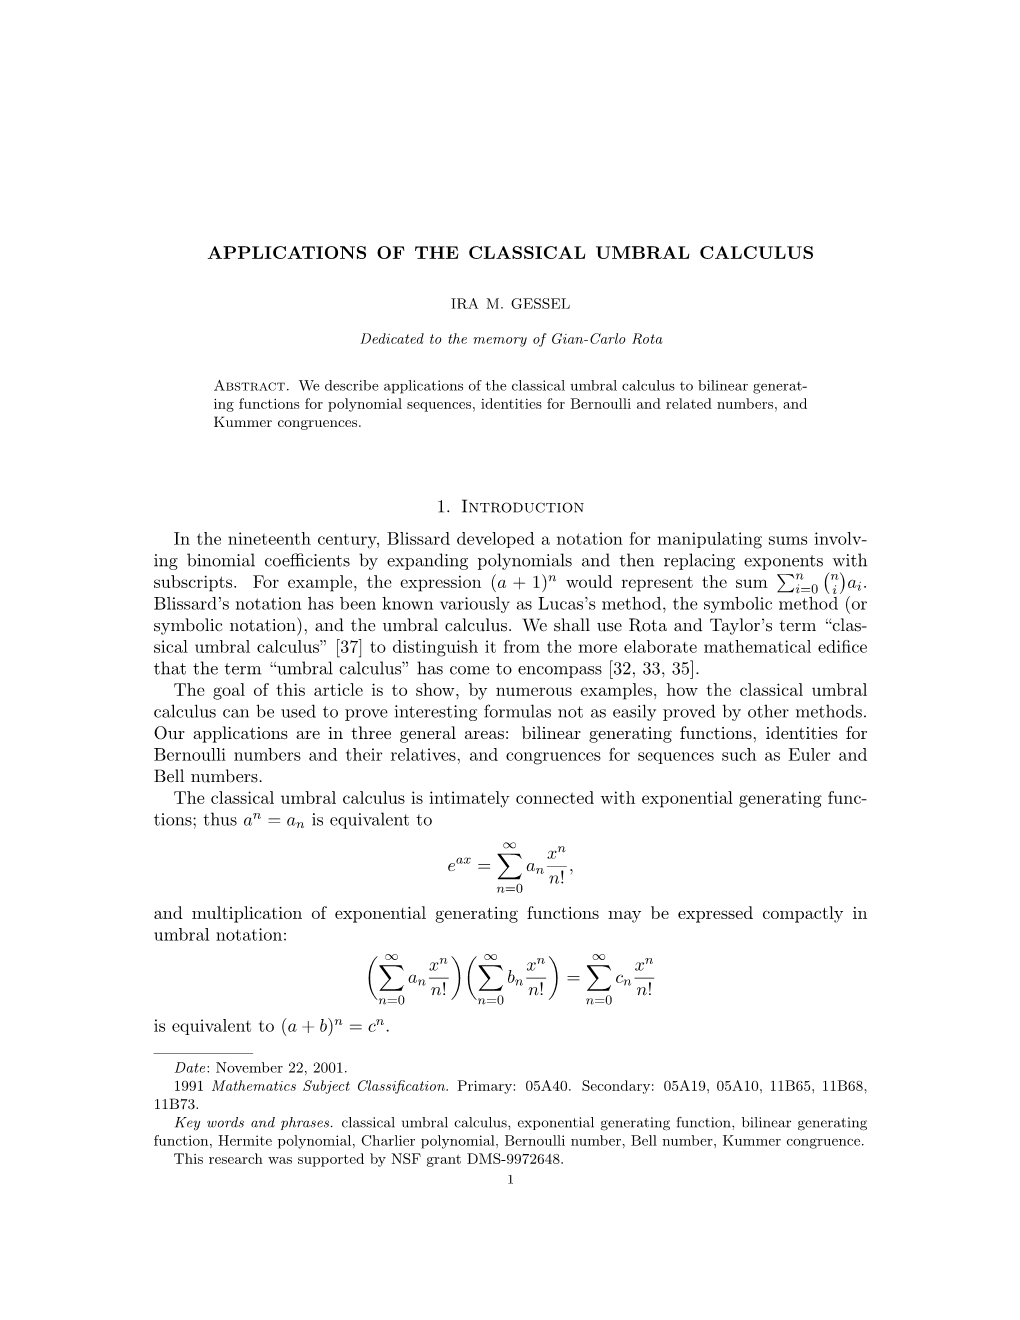 Applications of the Classical Umbral Calculus